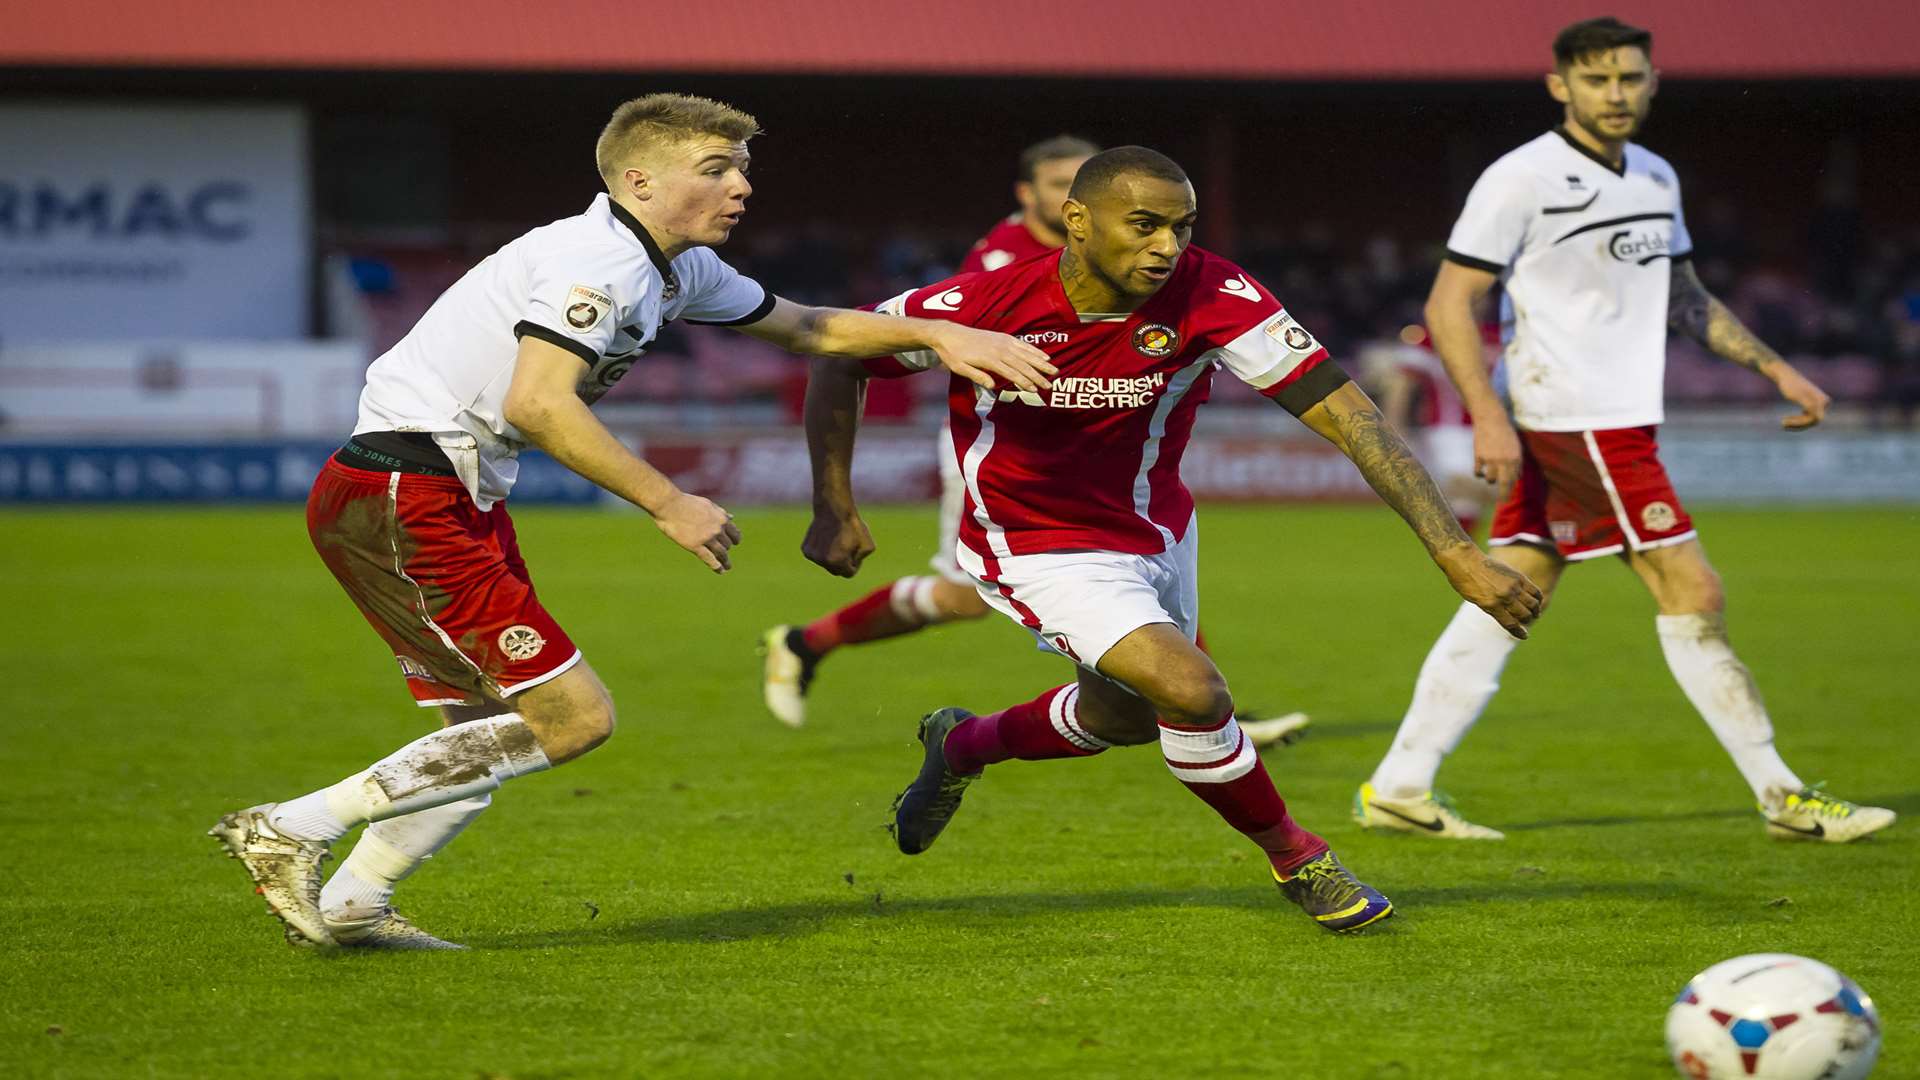 Danny Haynes drives forward for Ebbsfleet against Truro Picture: Andy Payton